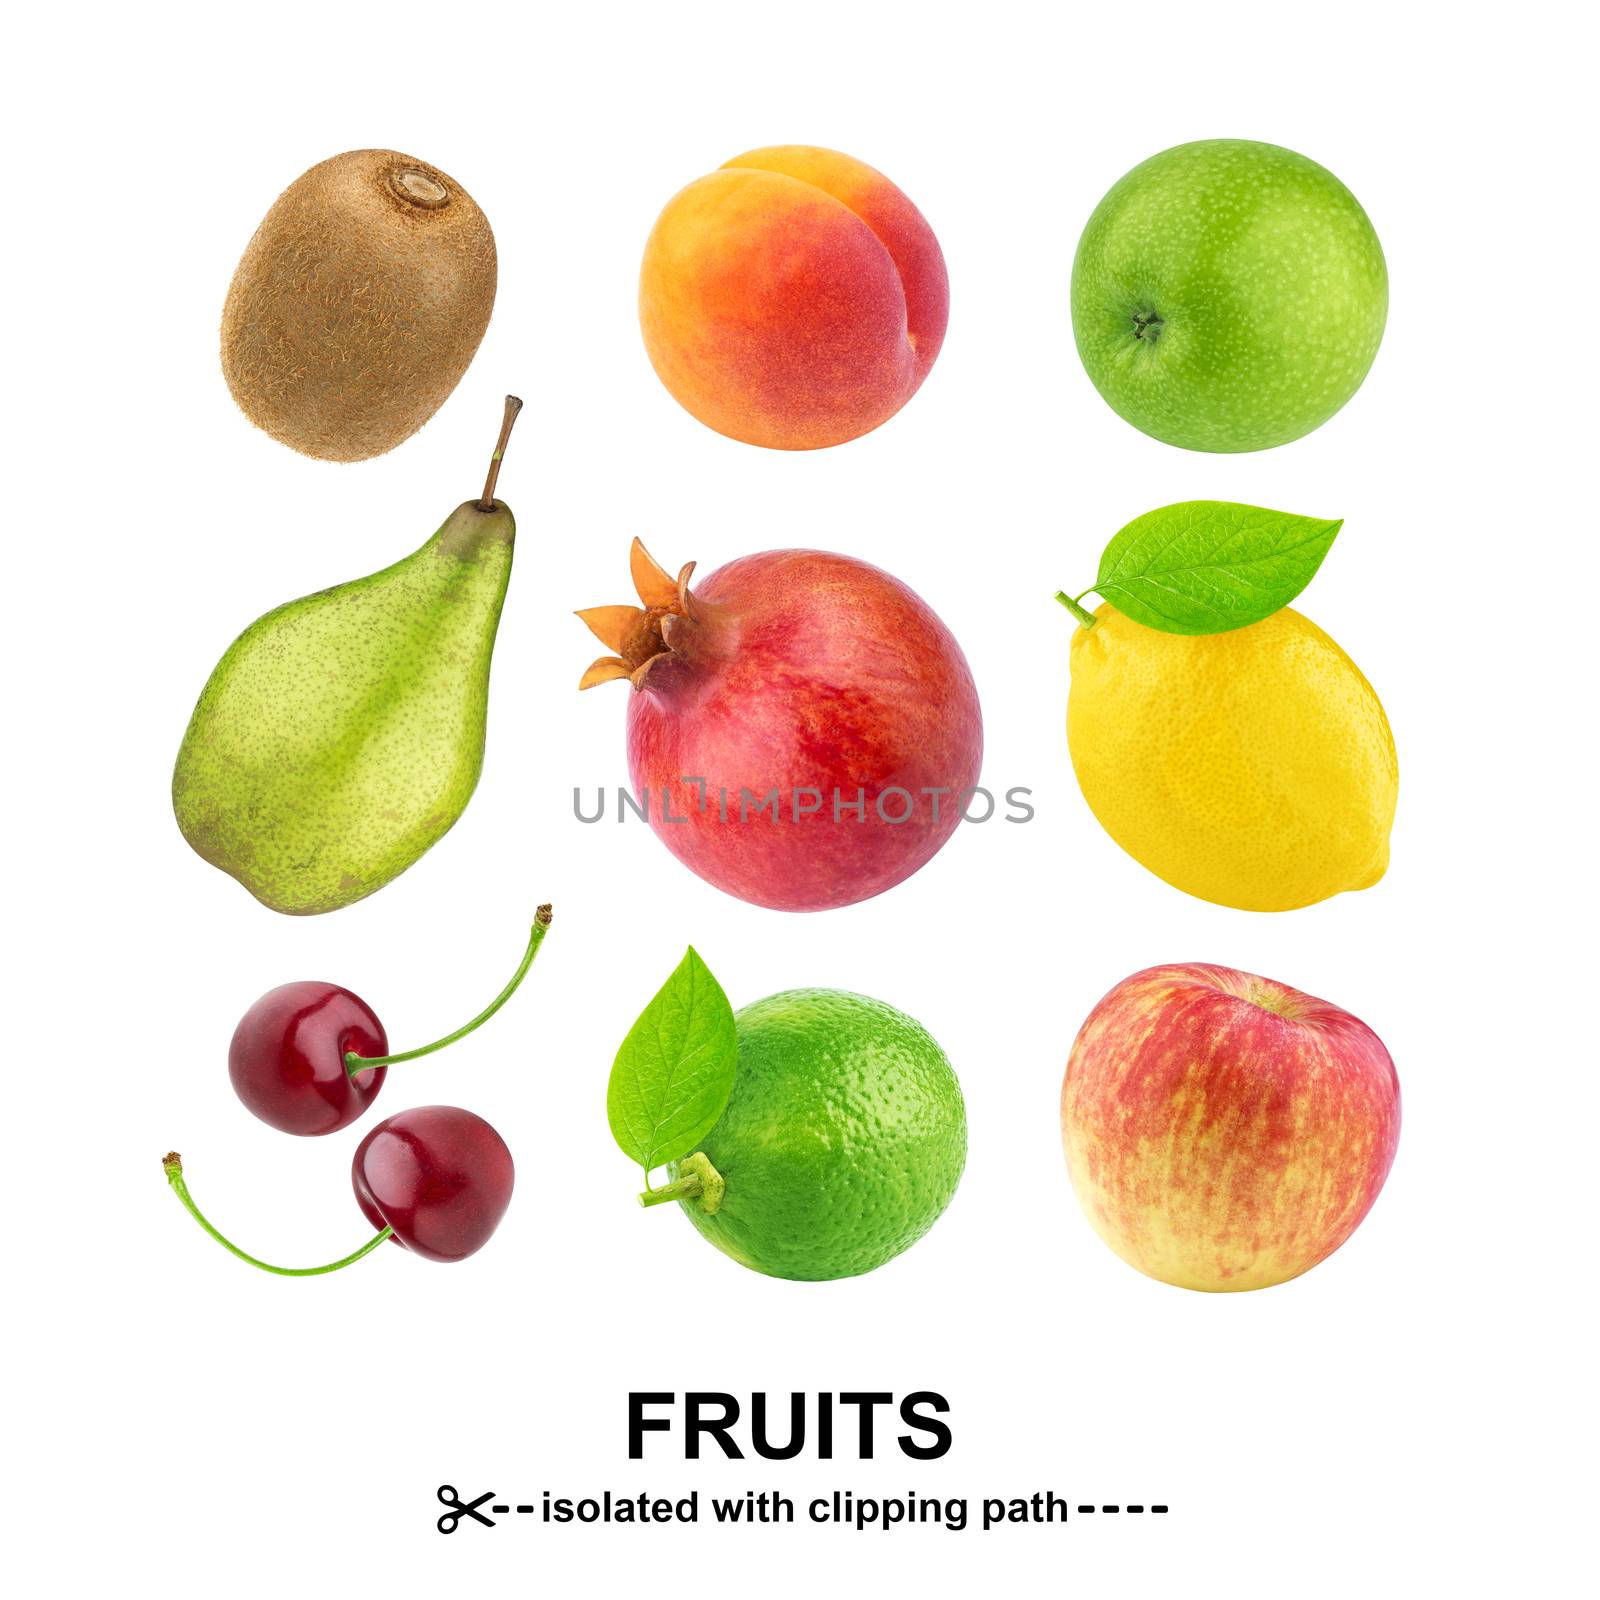 Fruits collection. Different fruits isolated on white background with clipping path. by xamtiw